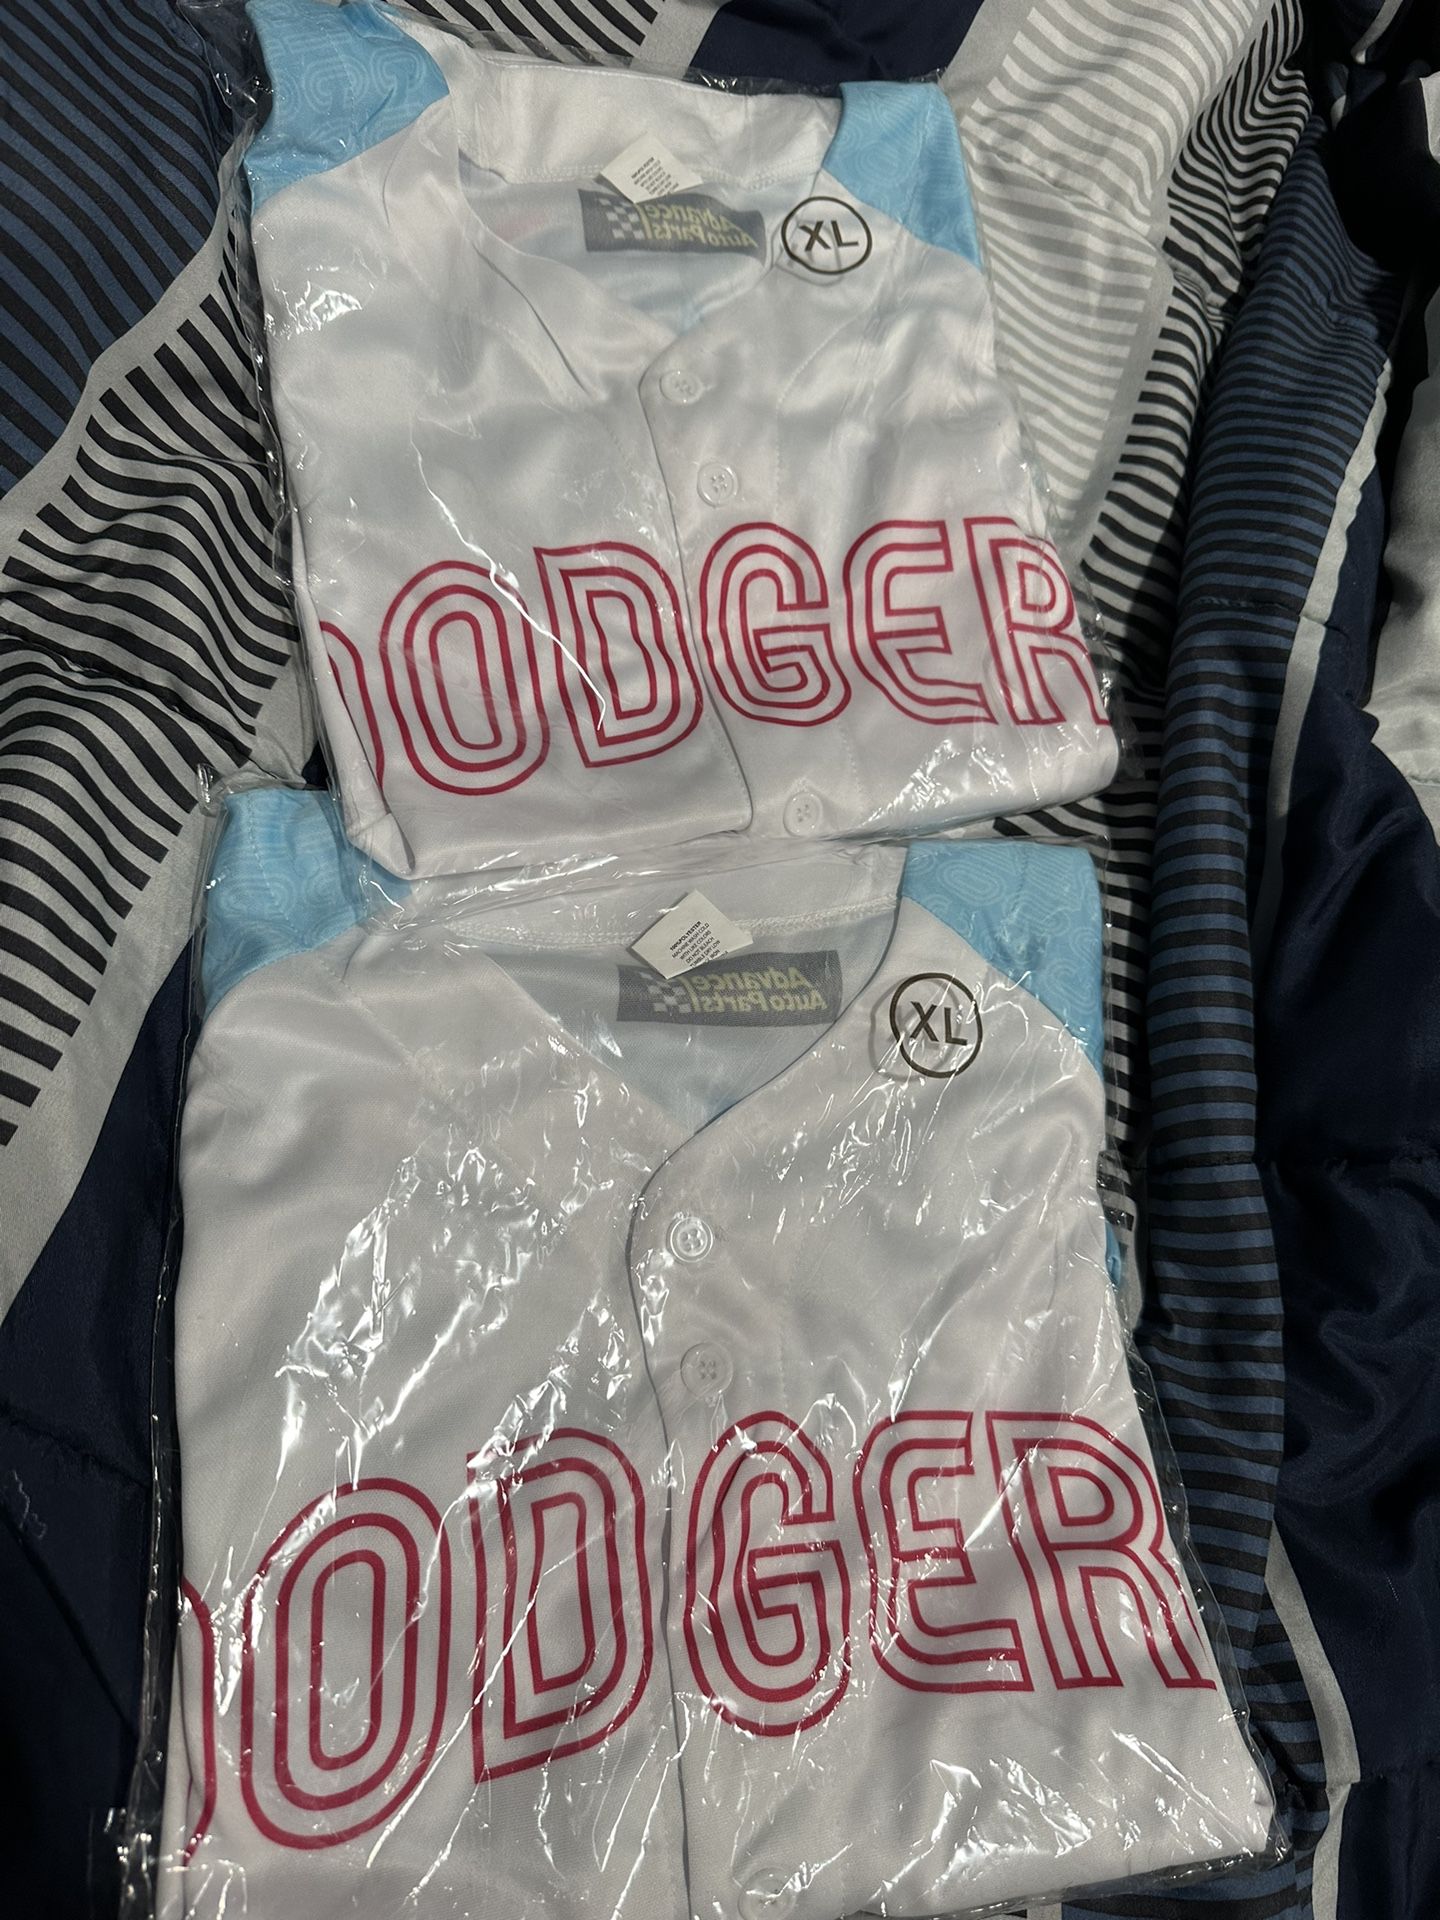 Infant Dodger jersey for Sale in Long Beach, CA - OfferUp